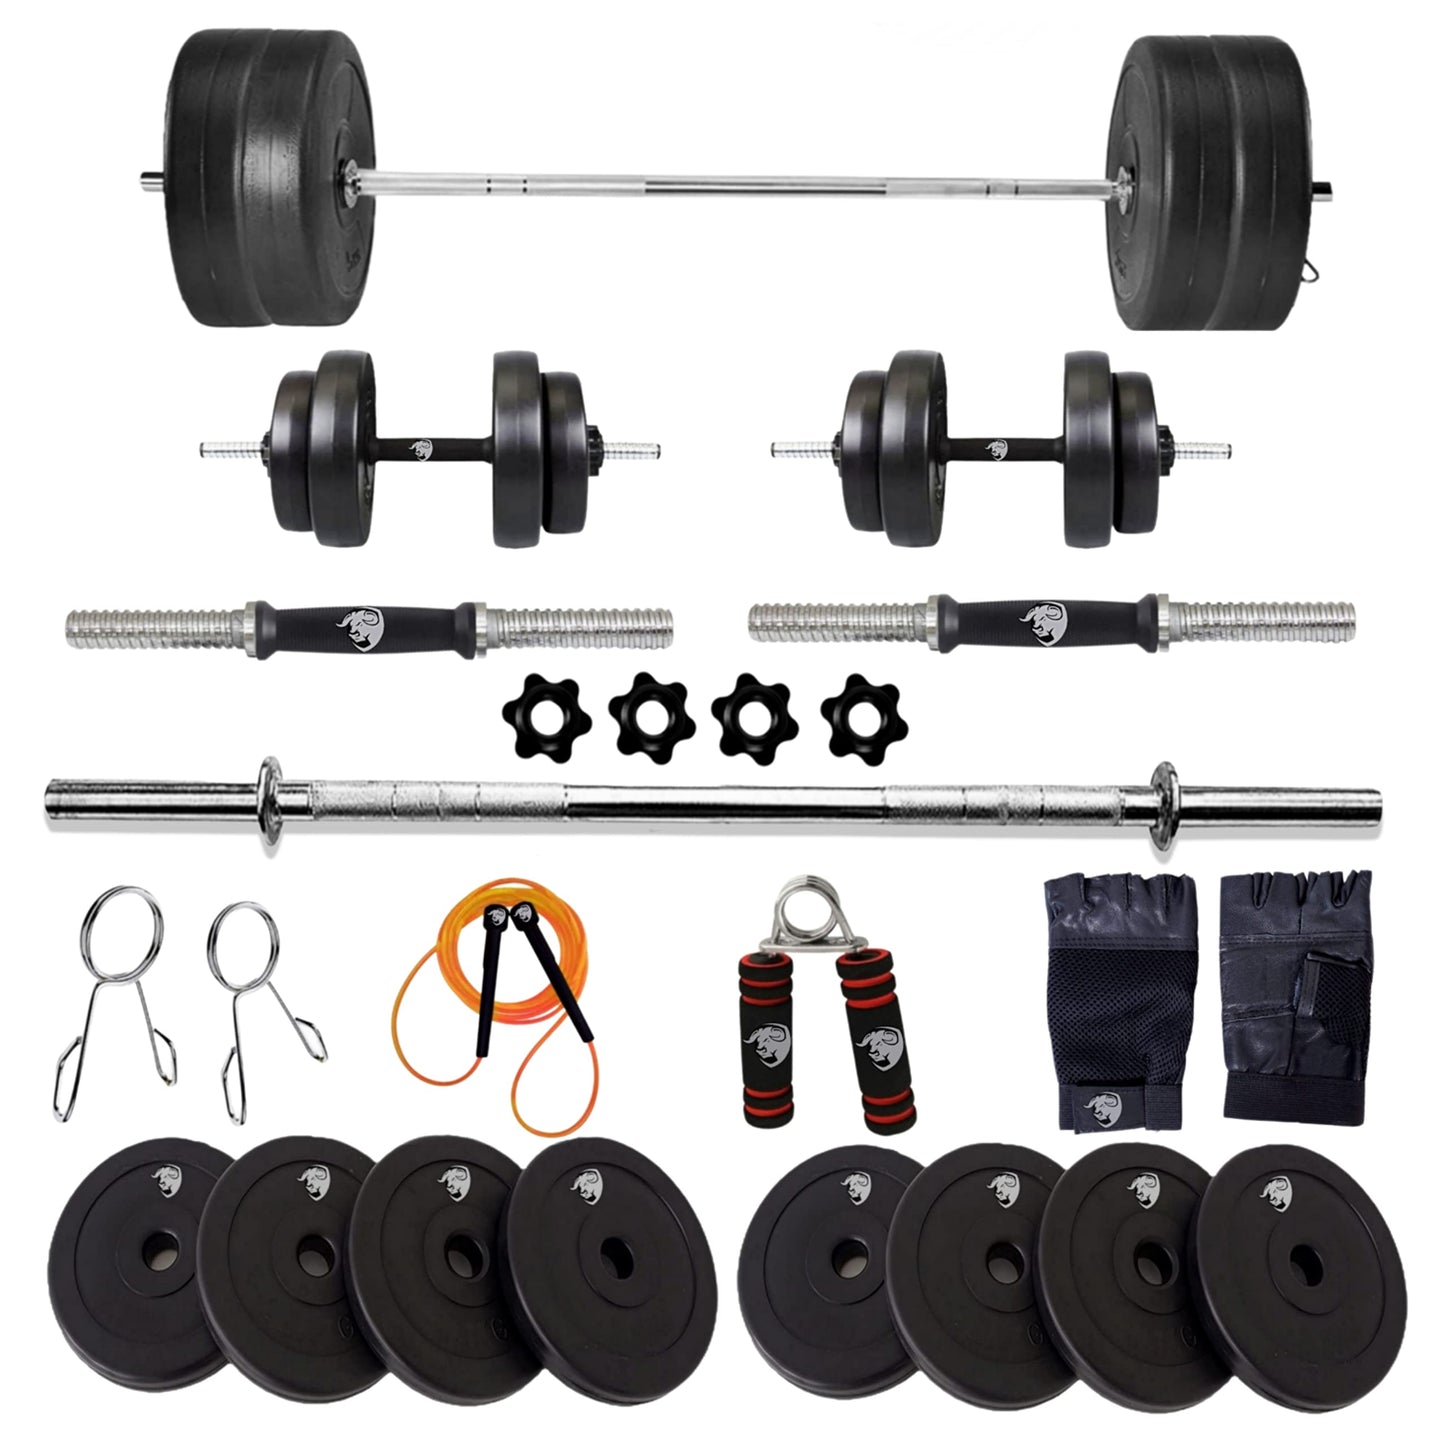 BULLAR Home Gym Set, 8kg to 20kg with 3 Straight Curl Rod and 2 Dumbbell Rods, Gym Combo, and Home Workout Equipments with PVC Weights Plates (16kg Set)